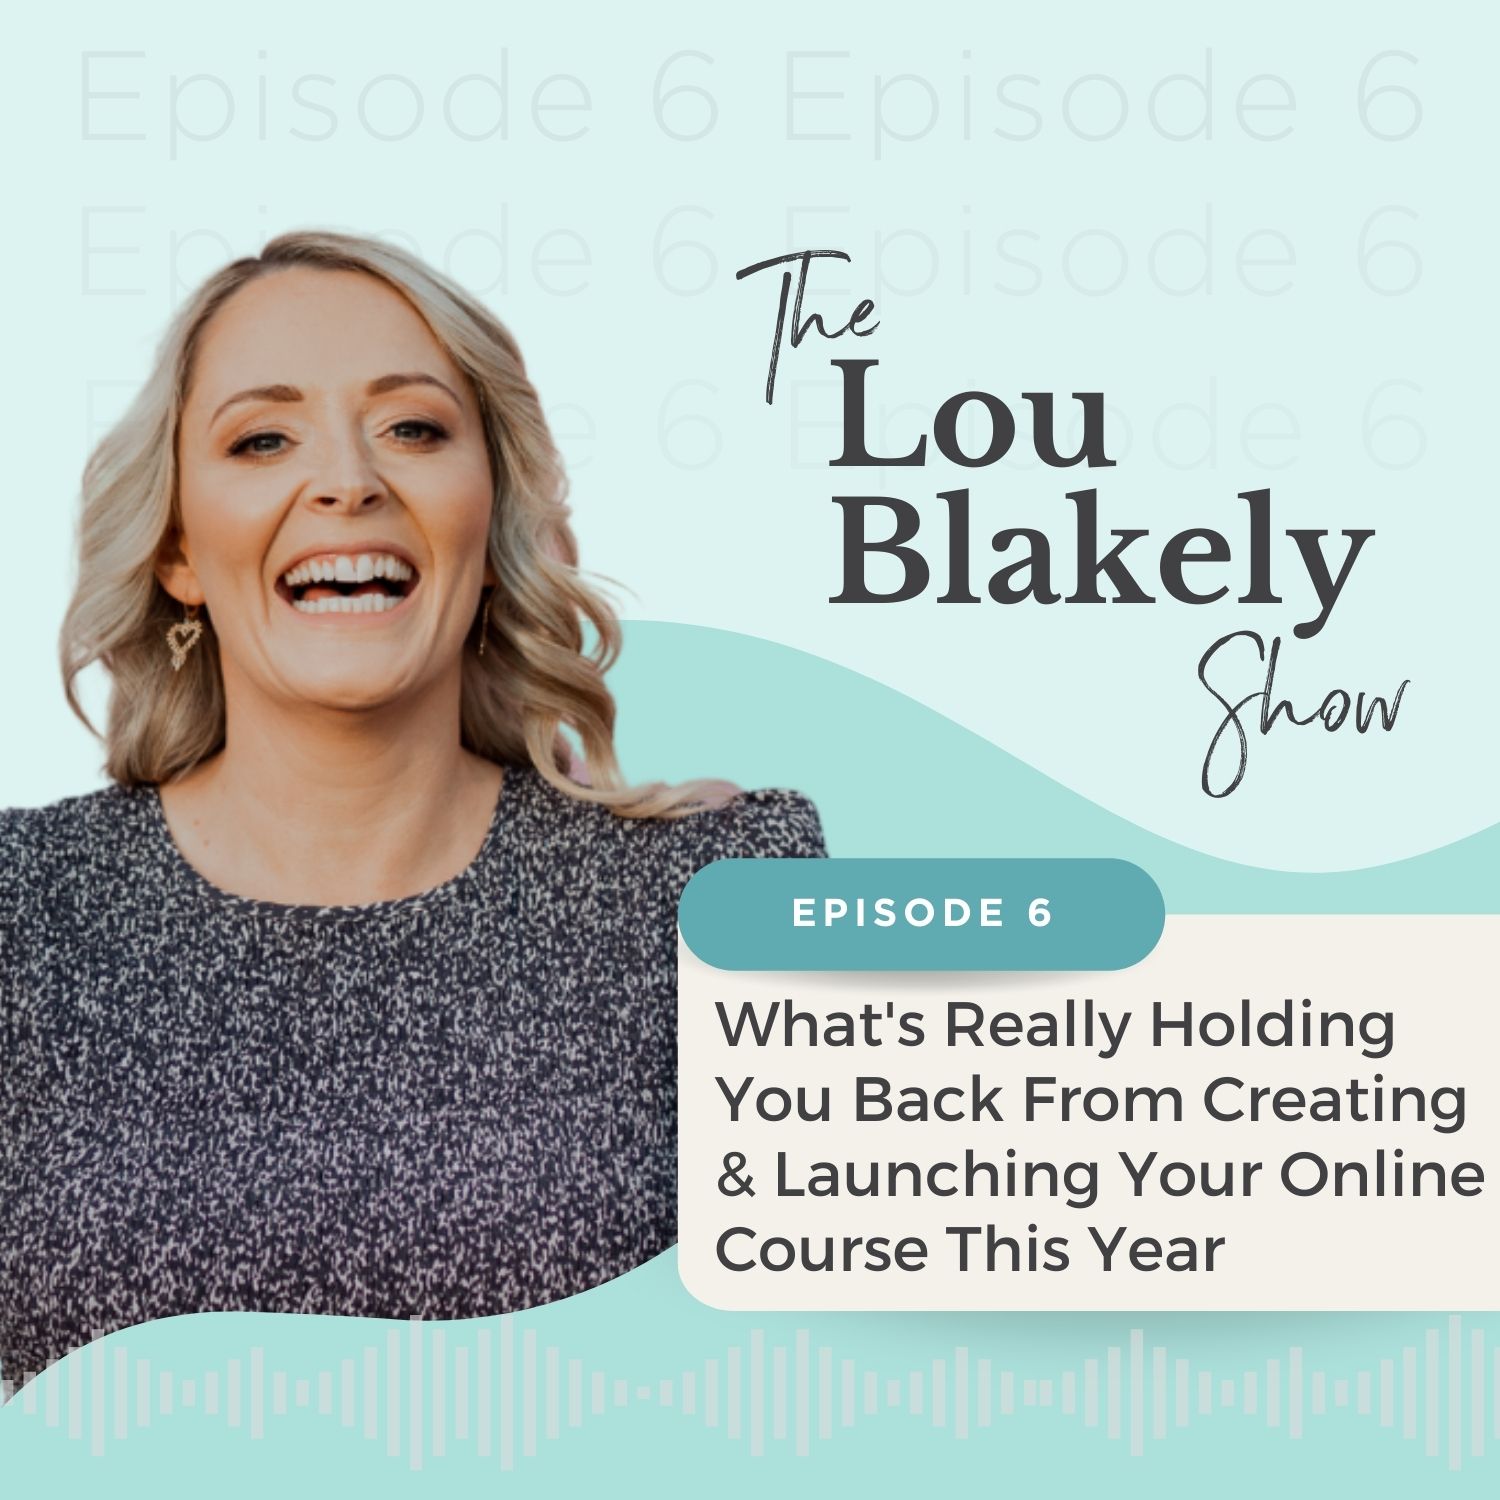 Whats really holding you back from creating and launching your online course this year